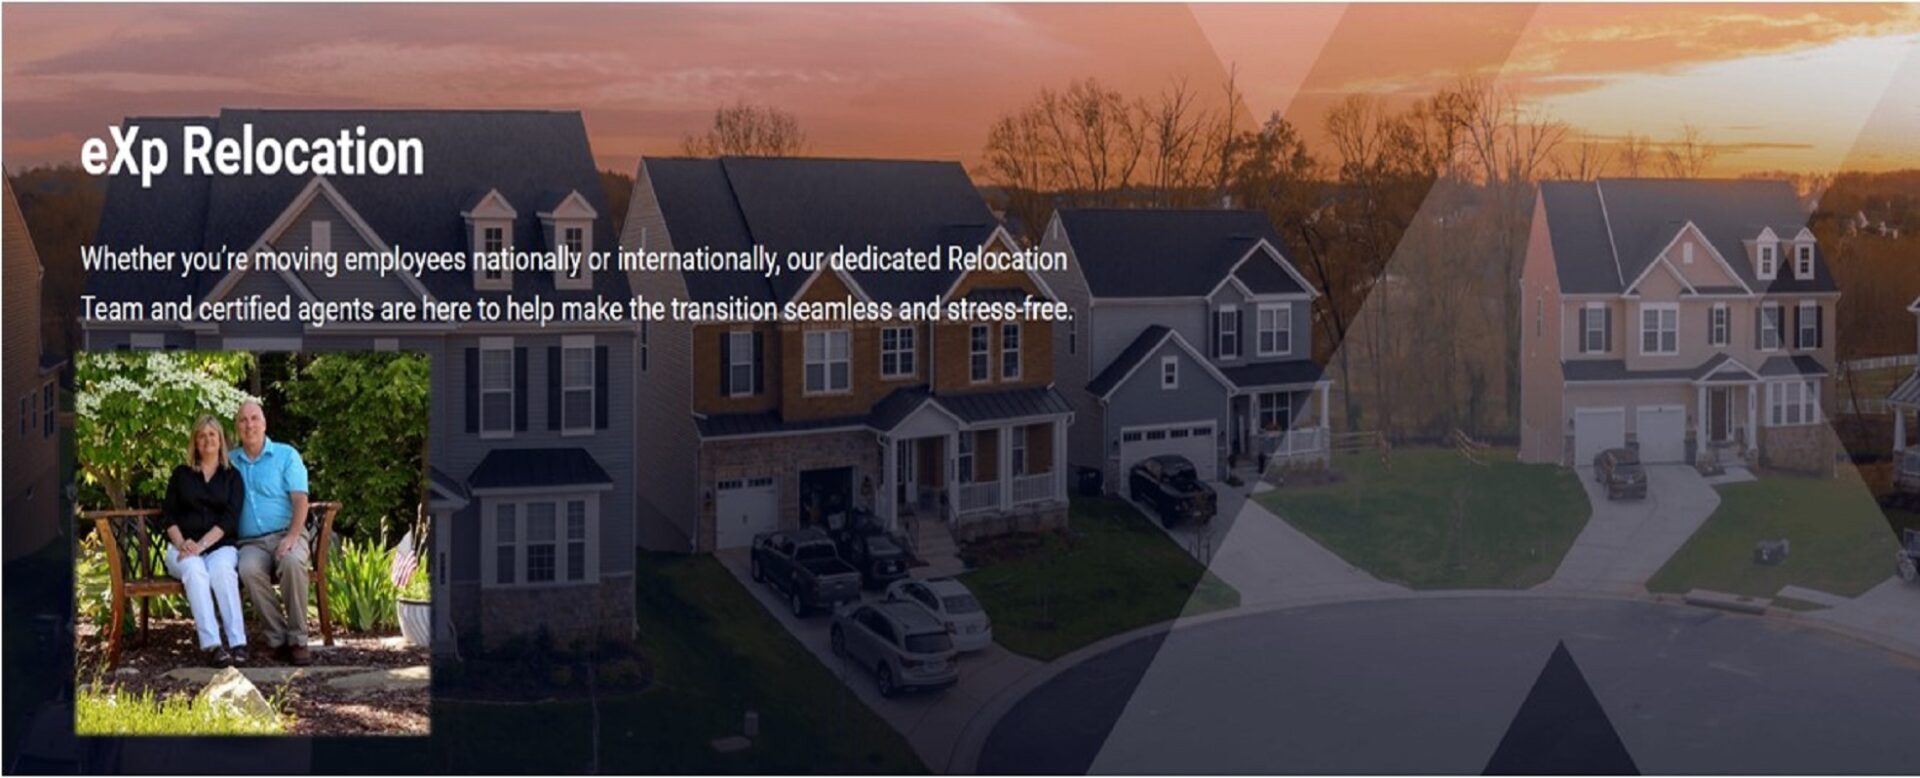 Relocation Page Banner From eXp Page